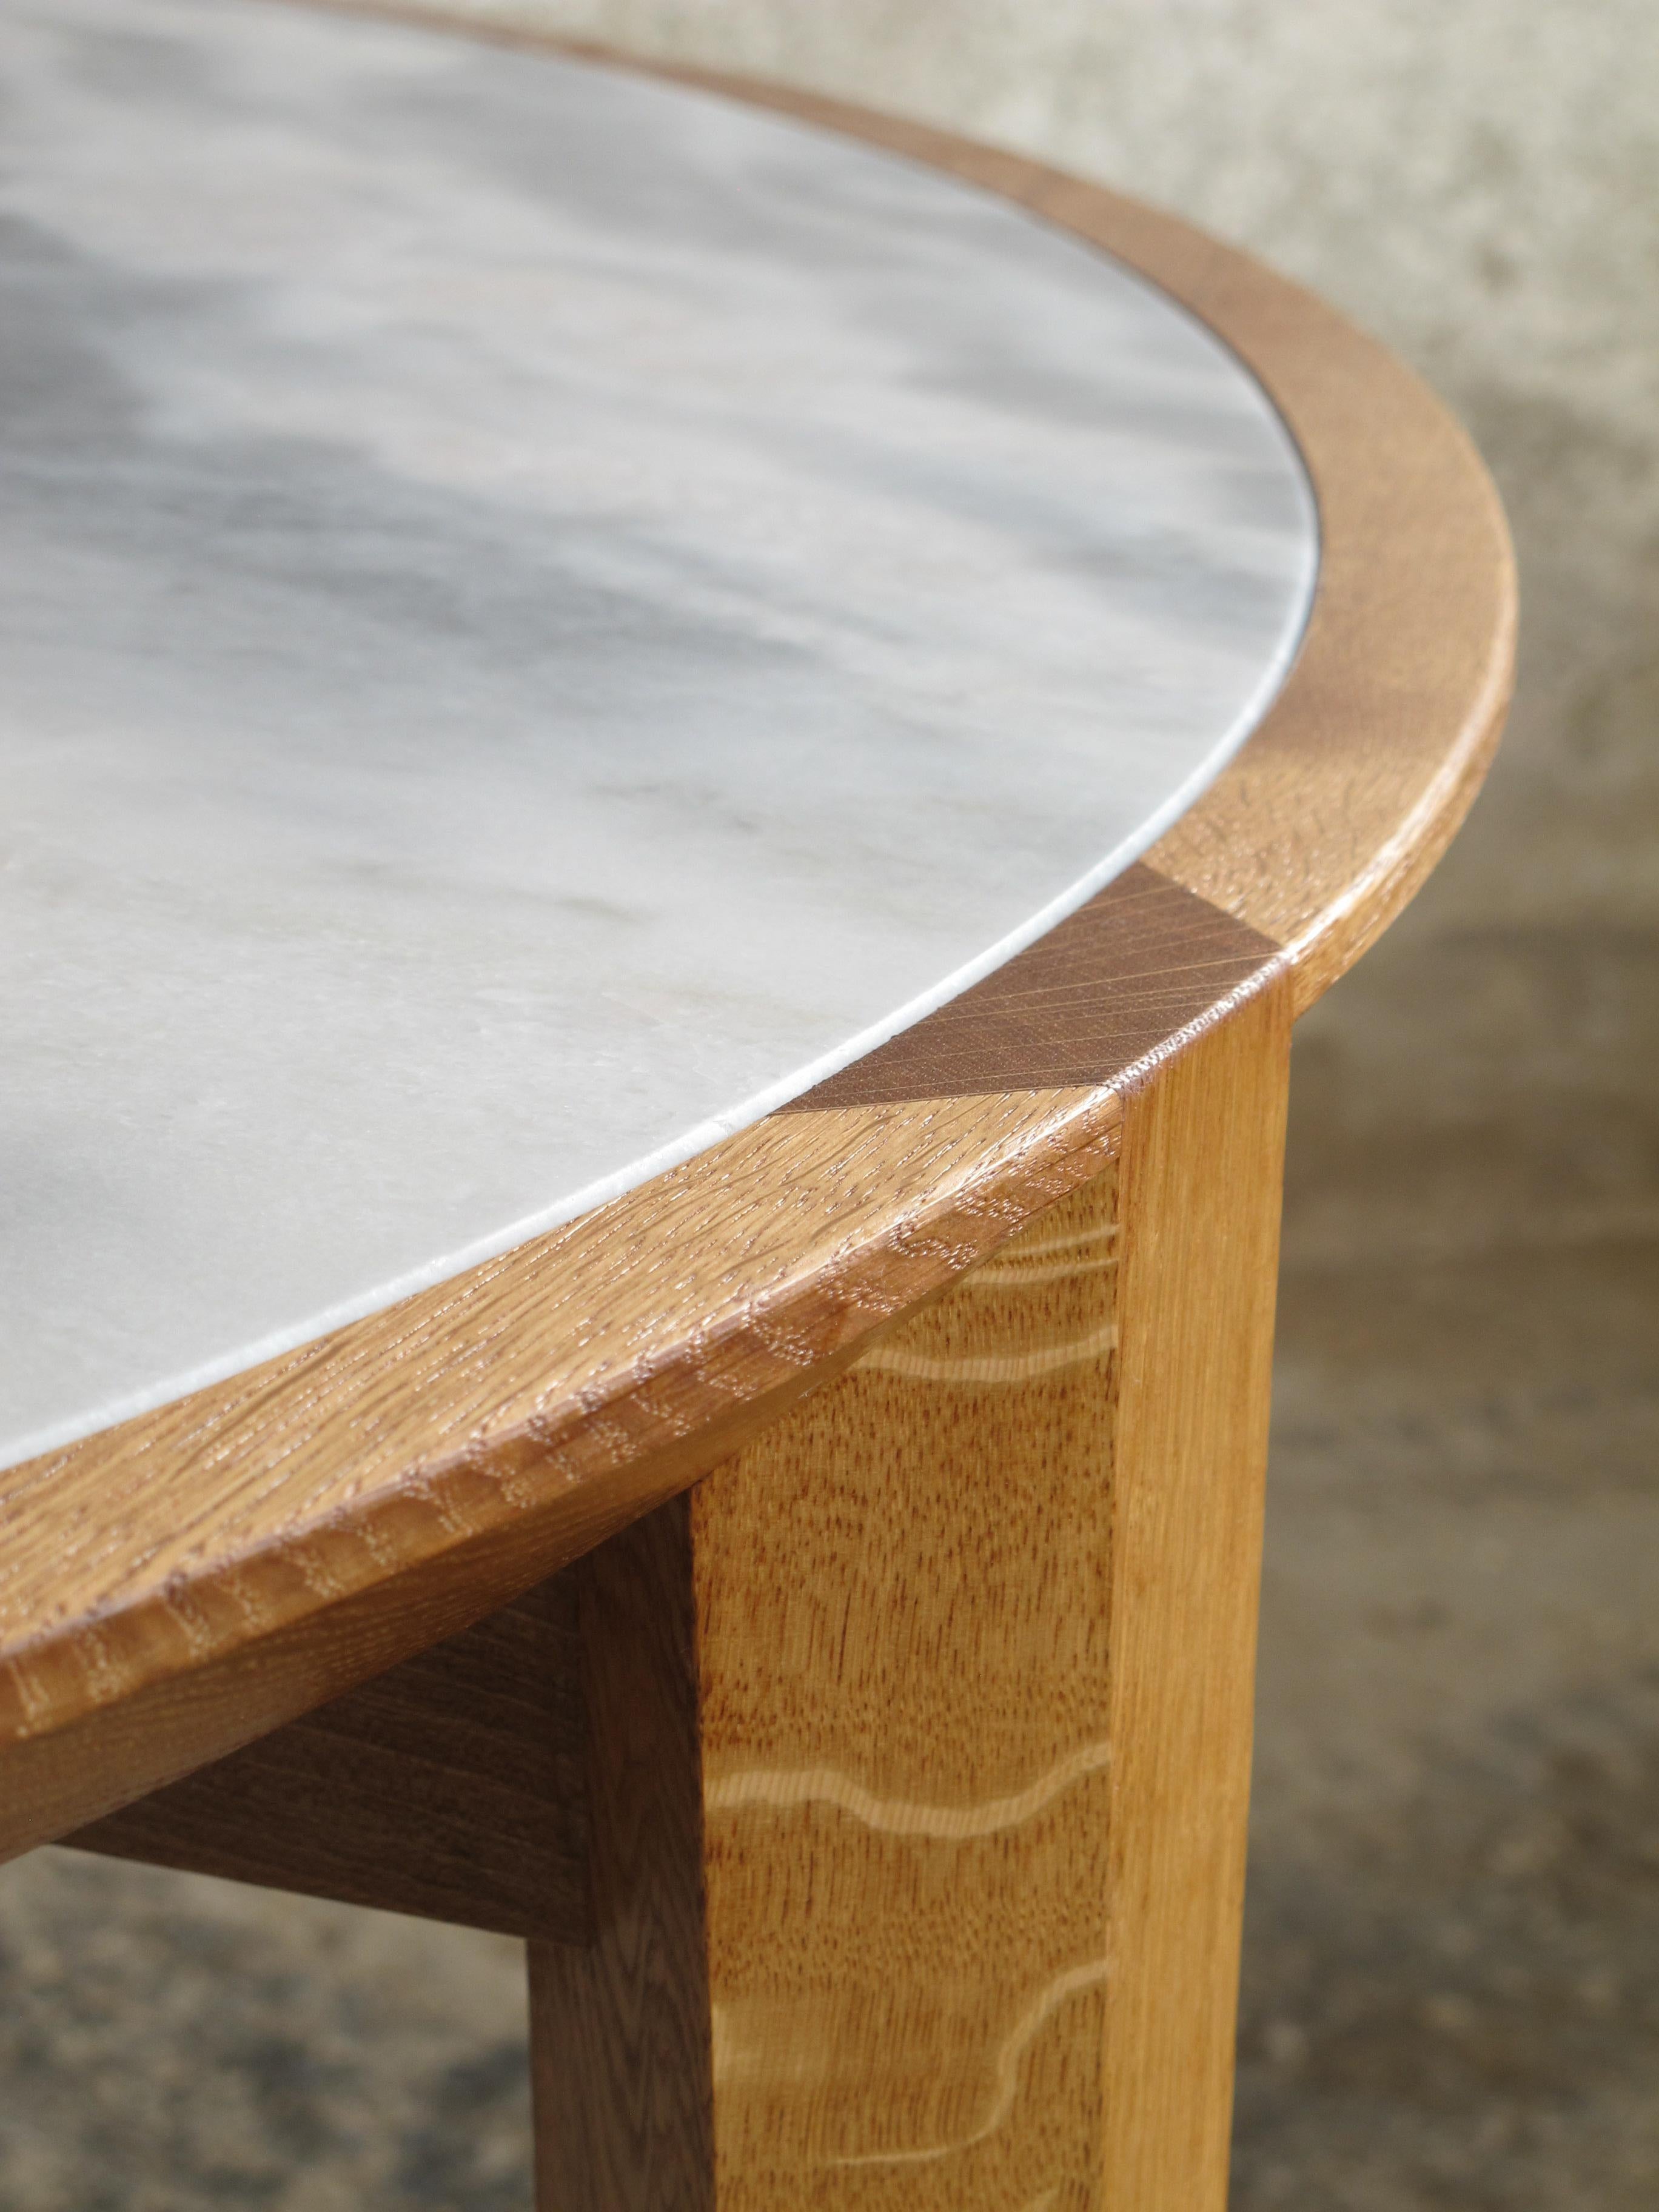 This carefully designed and handcrafted contemporary round wooden dinner table by Tomaz Viana holds a unique Estremoz marble top finely framed by a French oak stripe.

It´s elegant geometrical legs join the chamfered top revealing its grain in a